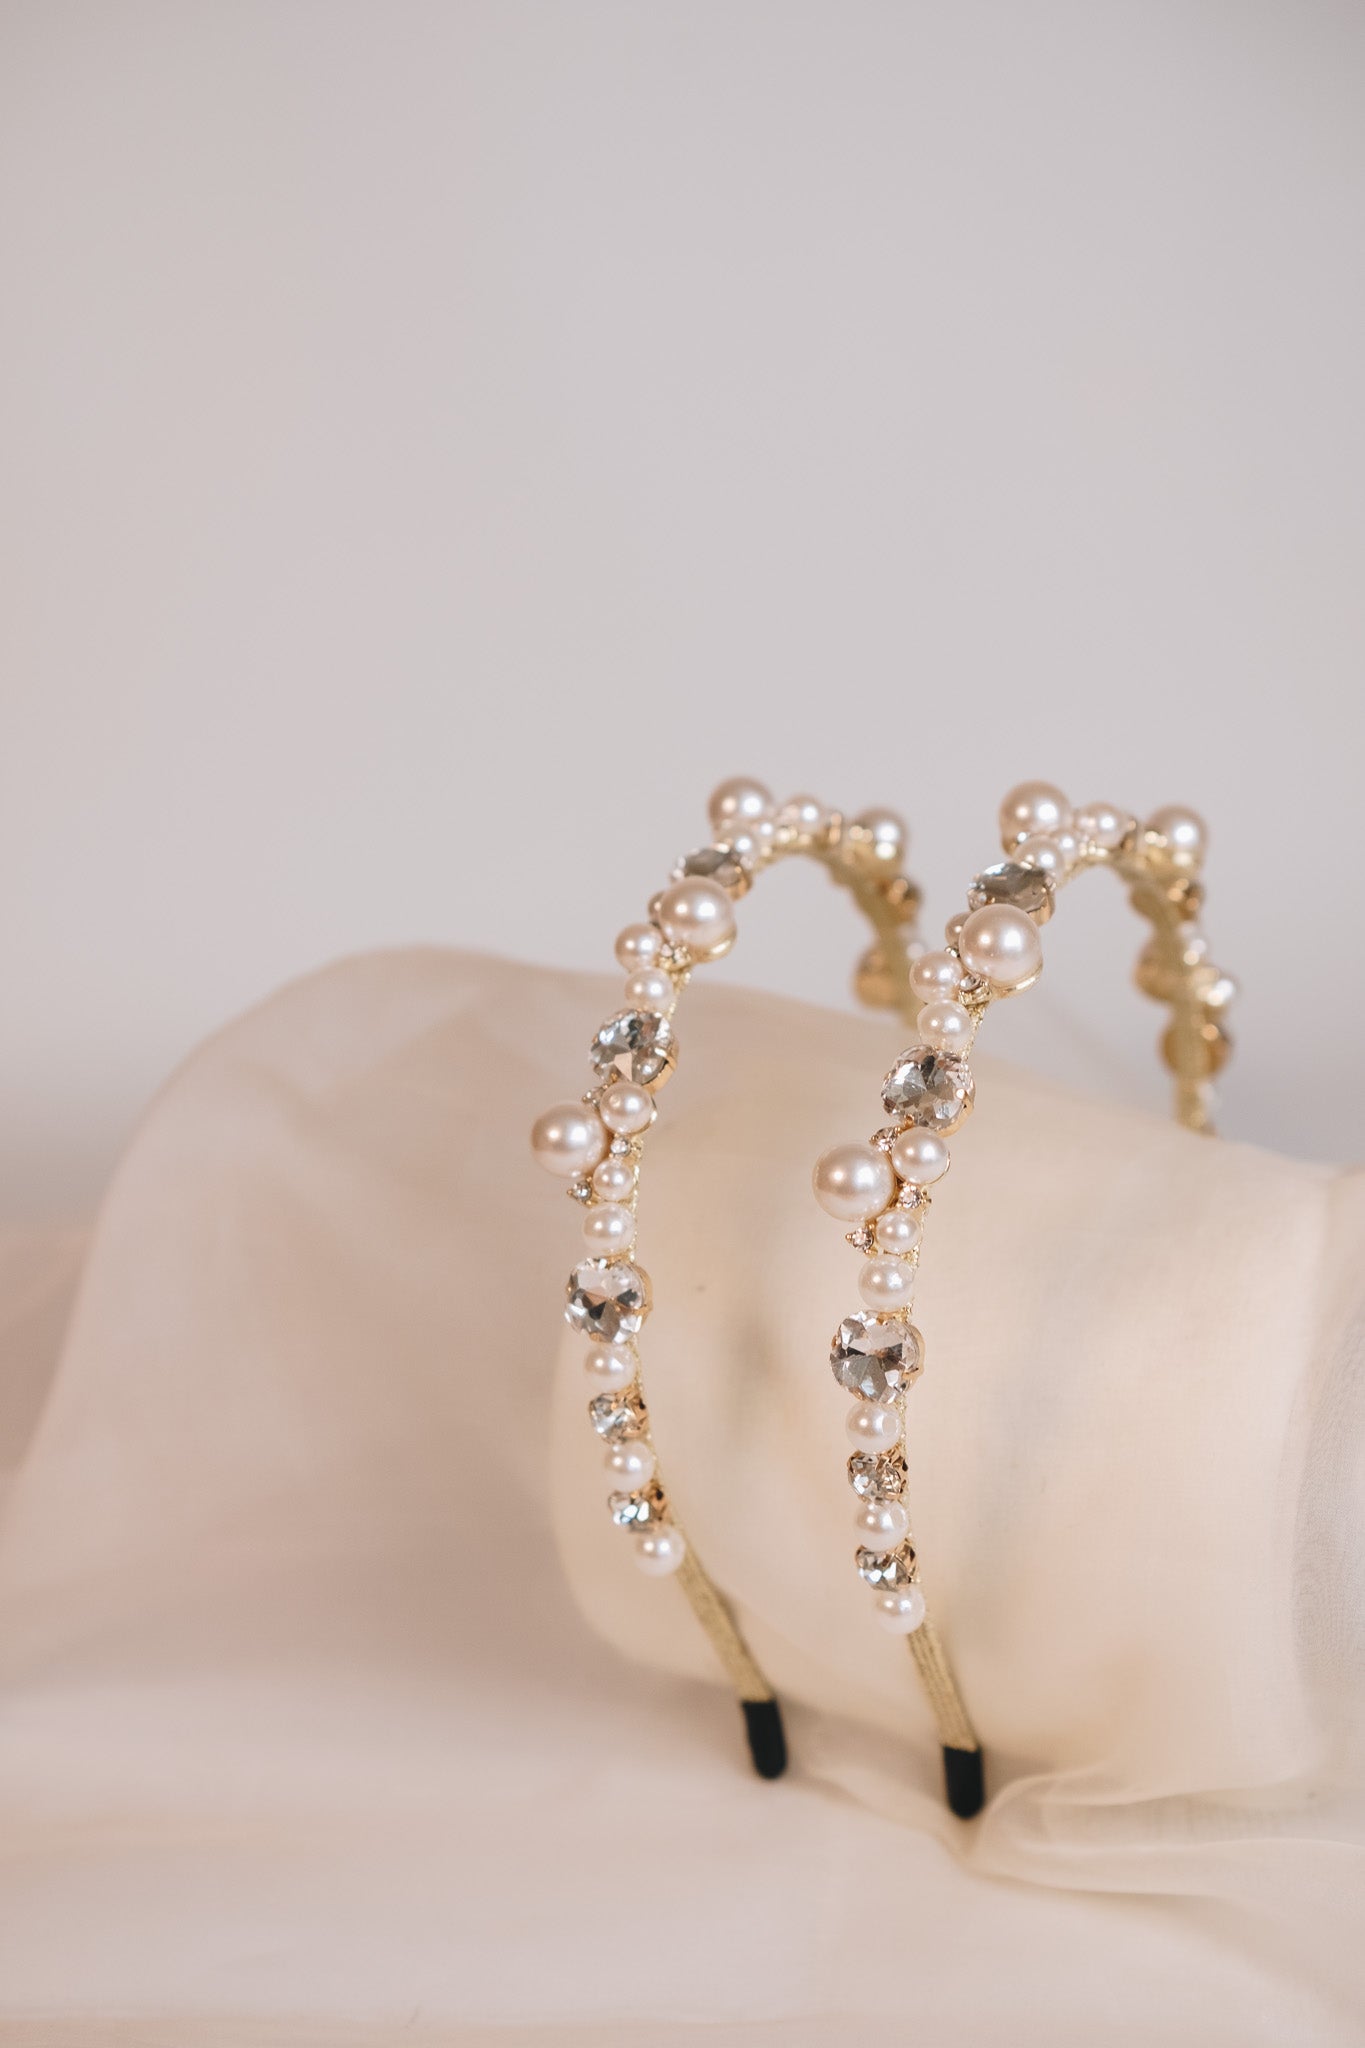 White Pearls and Square Crystals & Gold